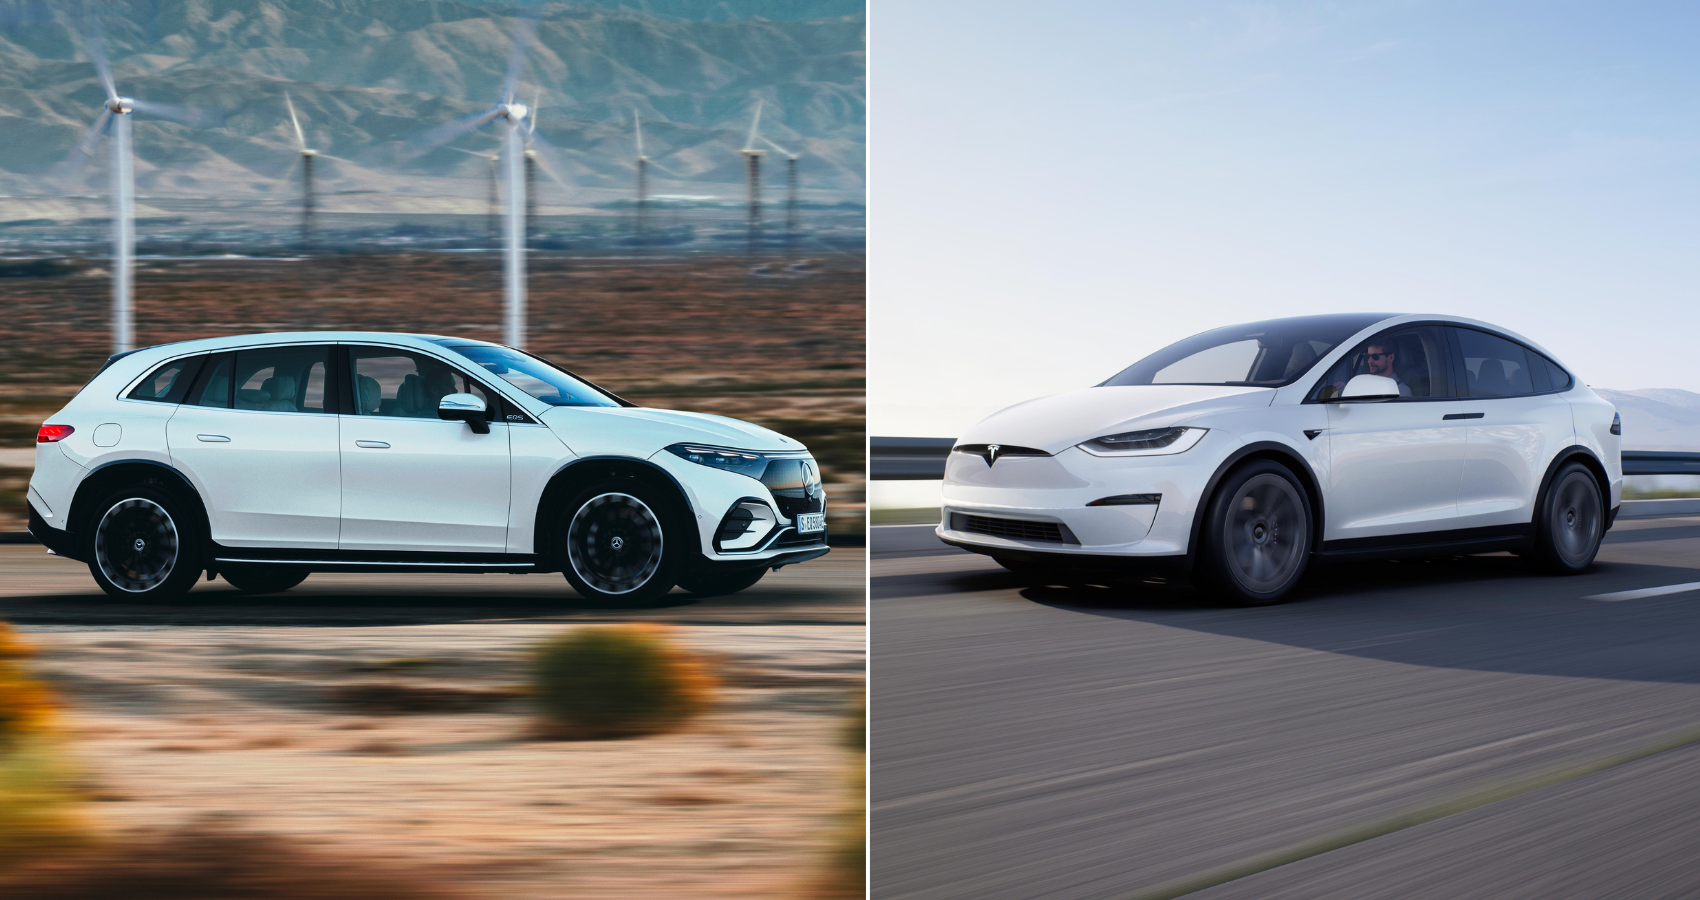 Why The Mercedes EQS Electric SUV Is Much Better Value Than The Tesla Model X